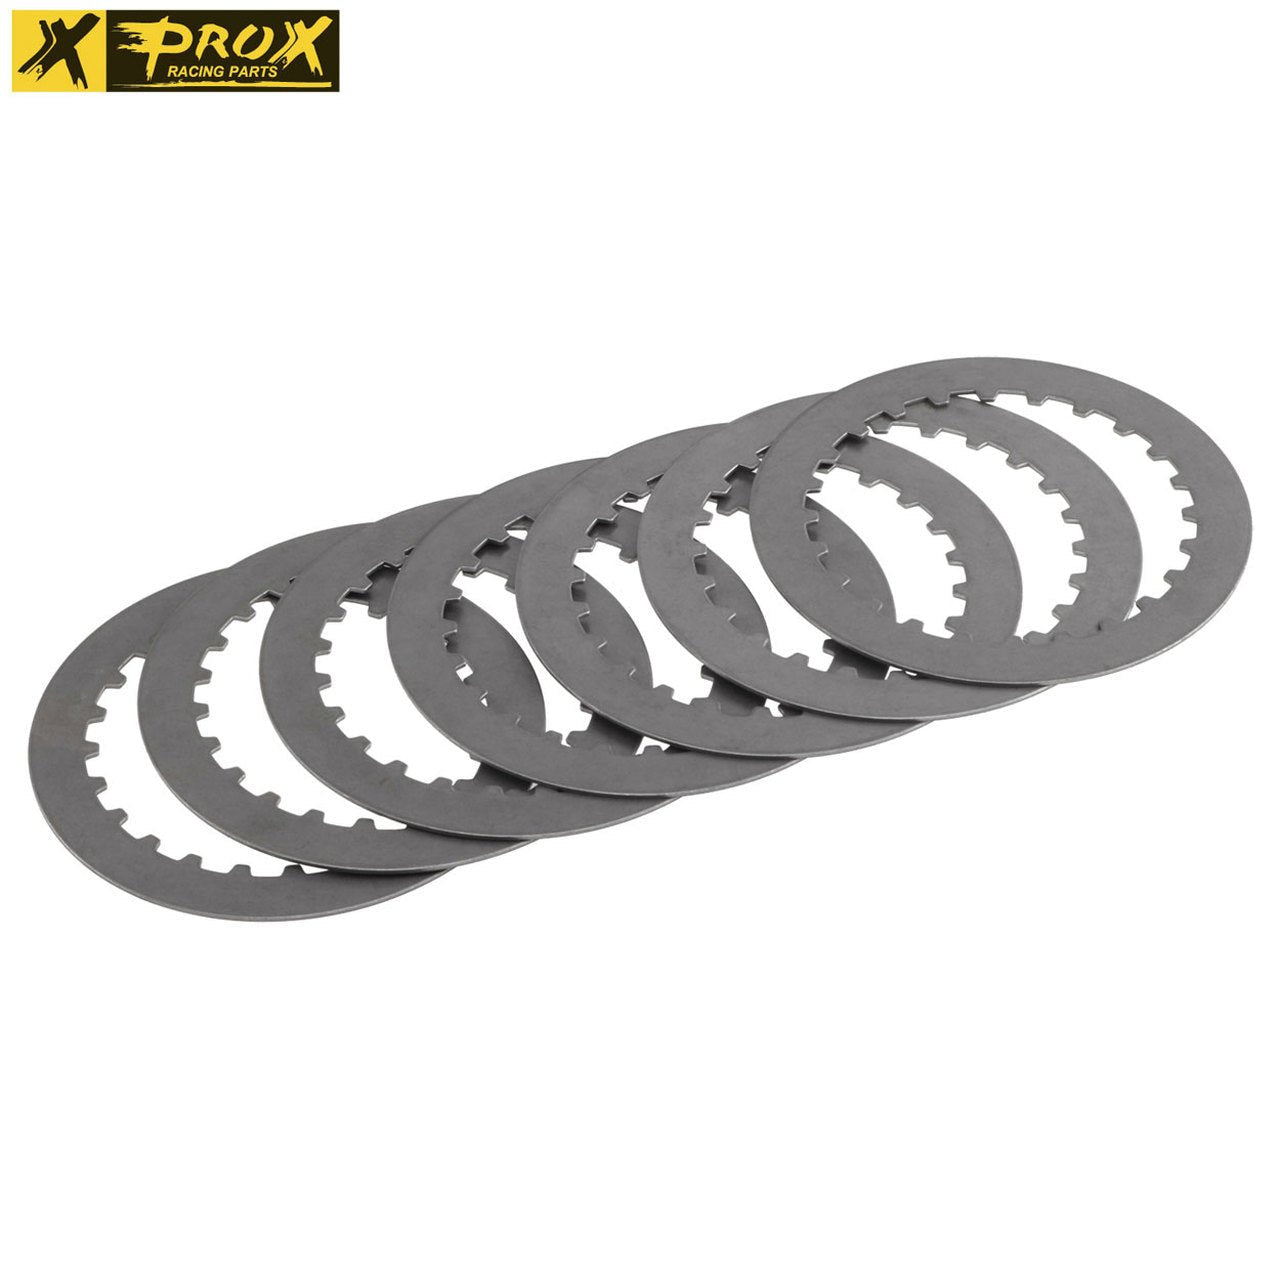 ProX Alloy/Steel Plate Set KTM125/144/150/200SX-EXC ’98-18 - ProX Racing Parts